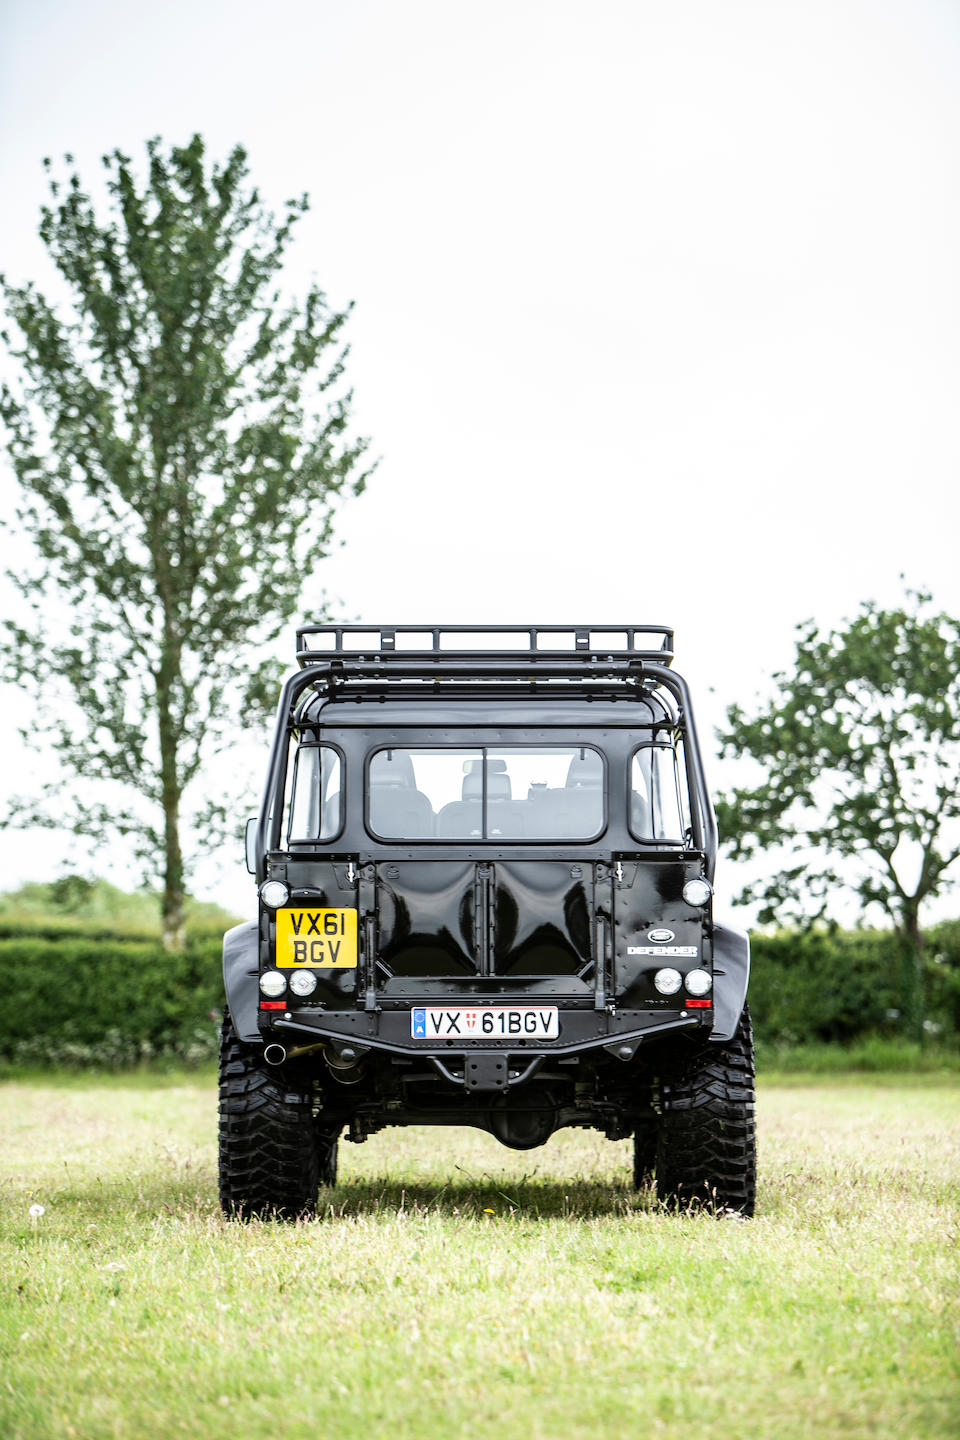 The only Land Rover used in two consecutive James Bond movies; Skyfall and Spectre,2011 Land Rover  Defender SVX 'Spectre' 4x4 Utility  Chassis no. SALLDHFS8AA797848